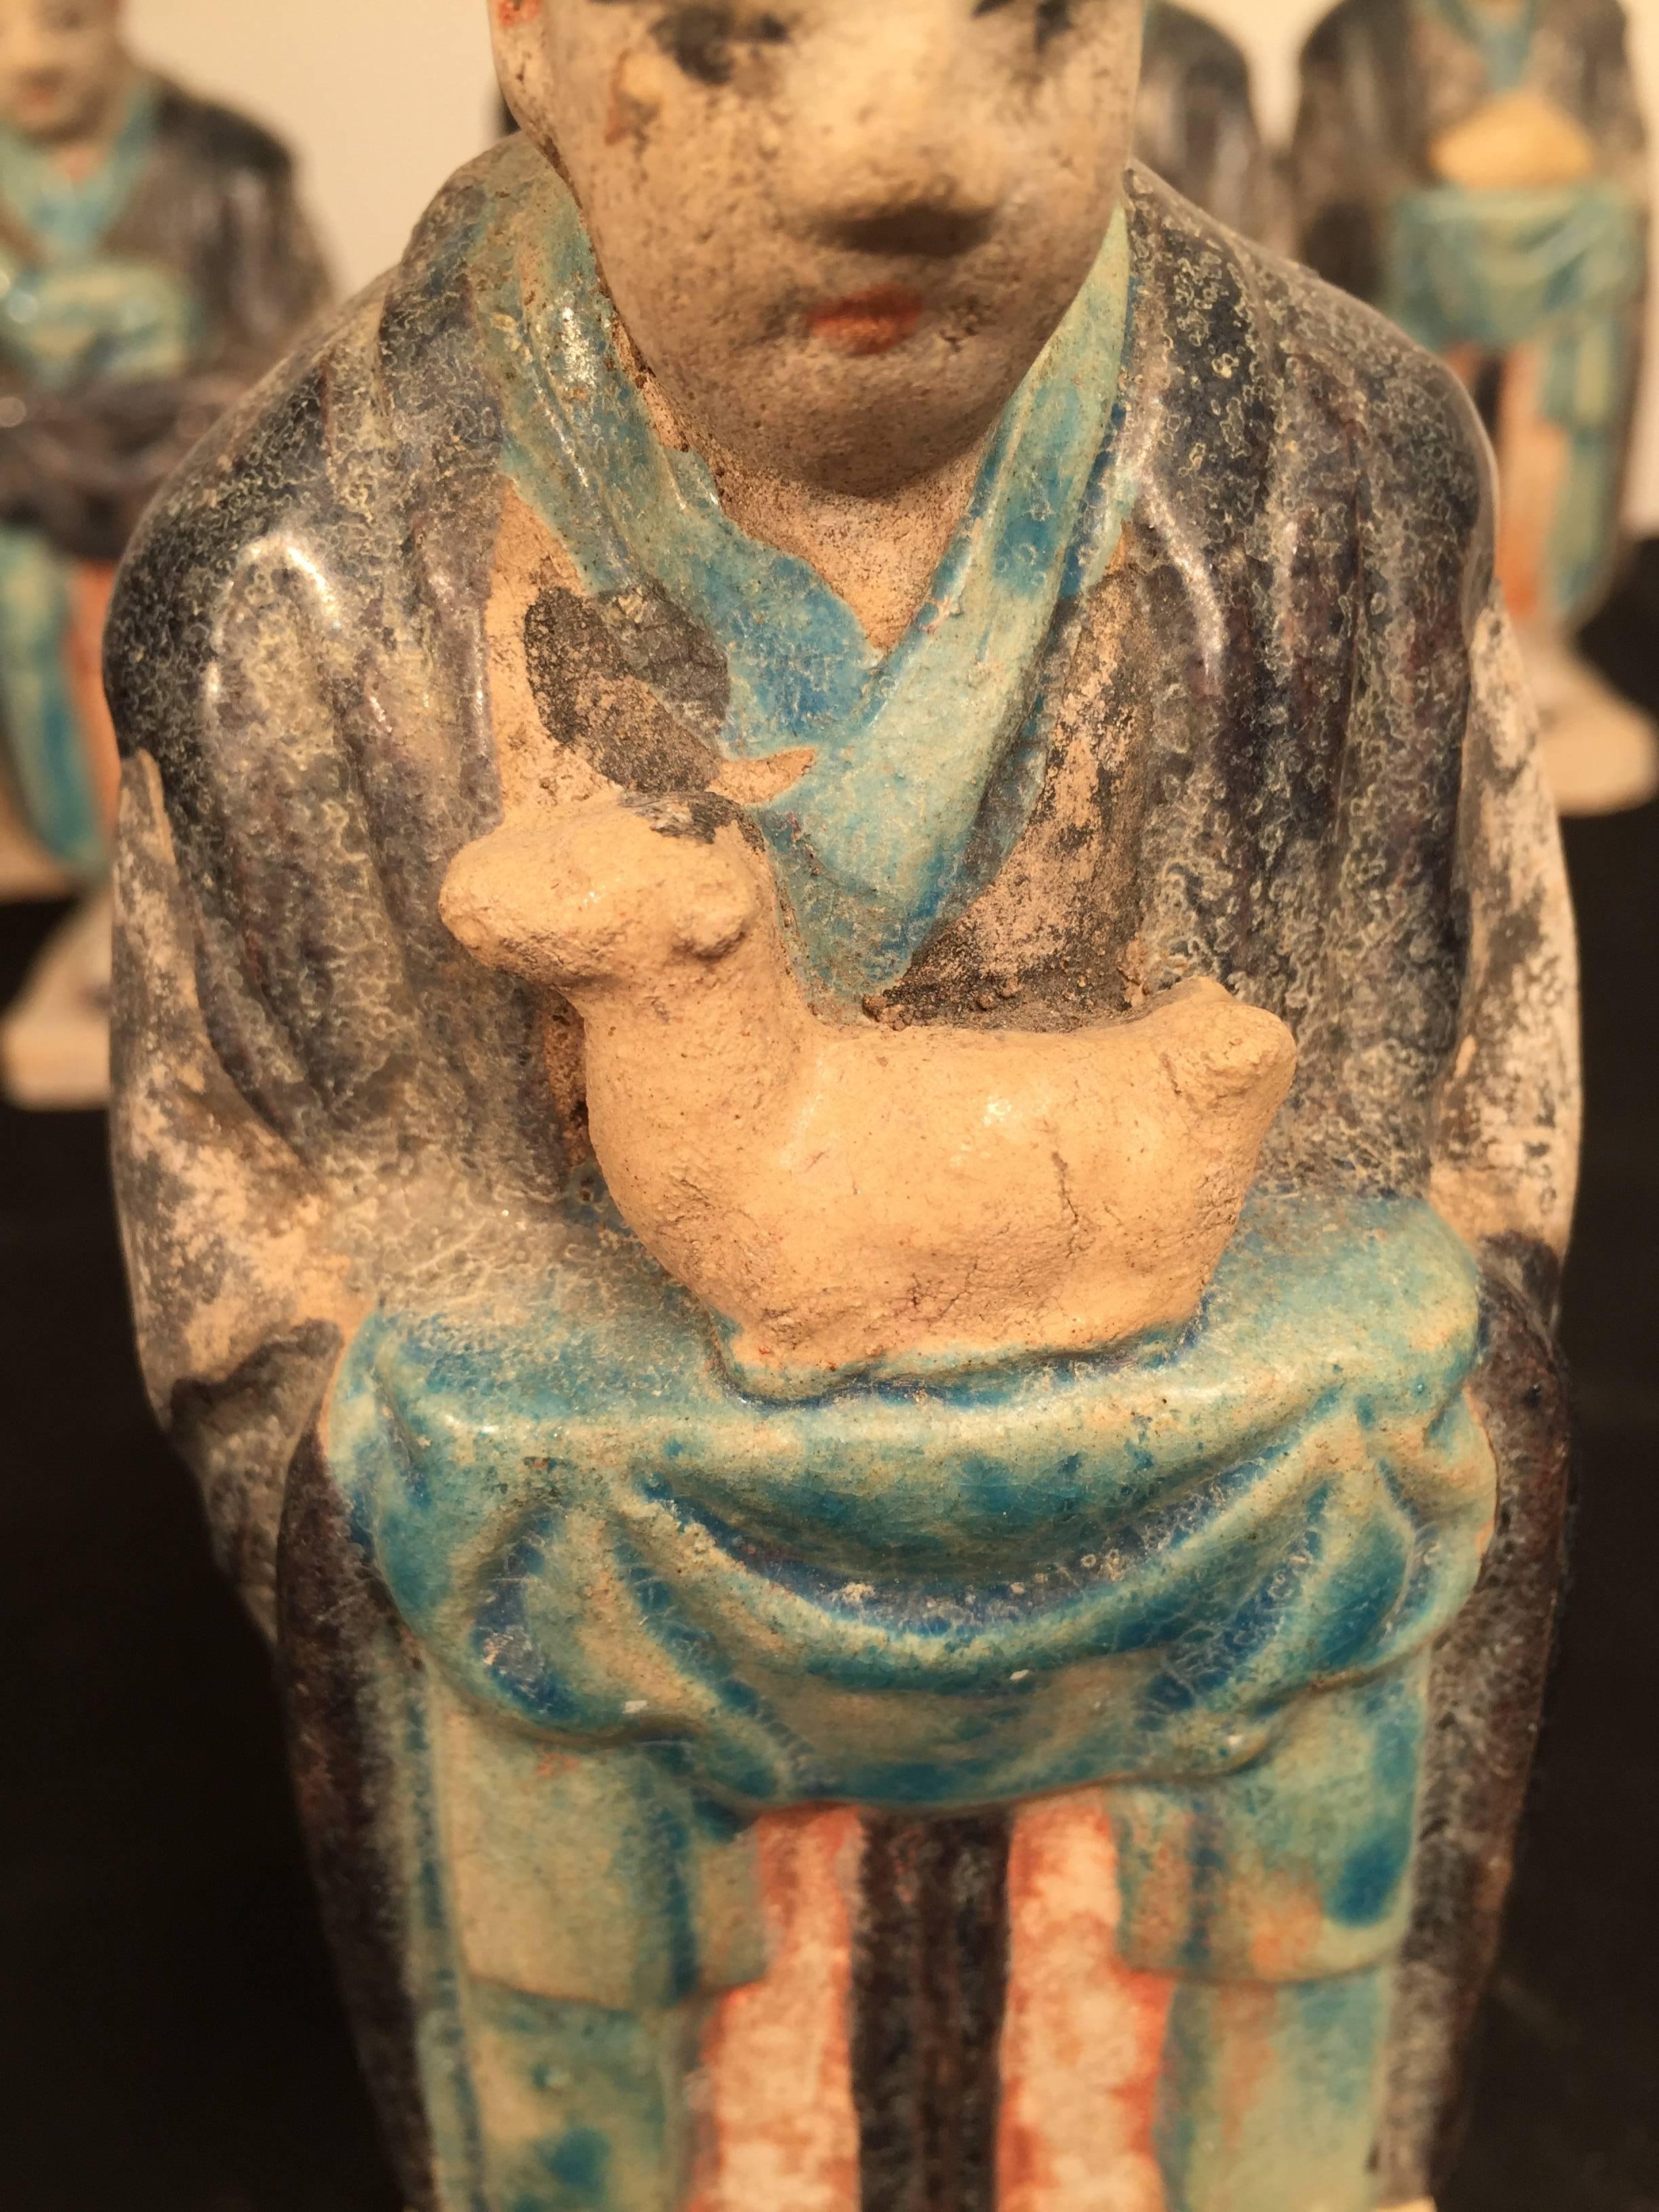 Glazed Important Ancient Chinese Zodiac Figure Holding a Dog, Ming Dynasty, 1368-1644